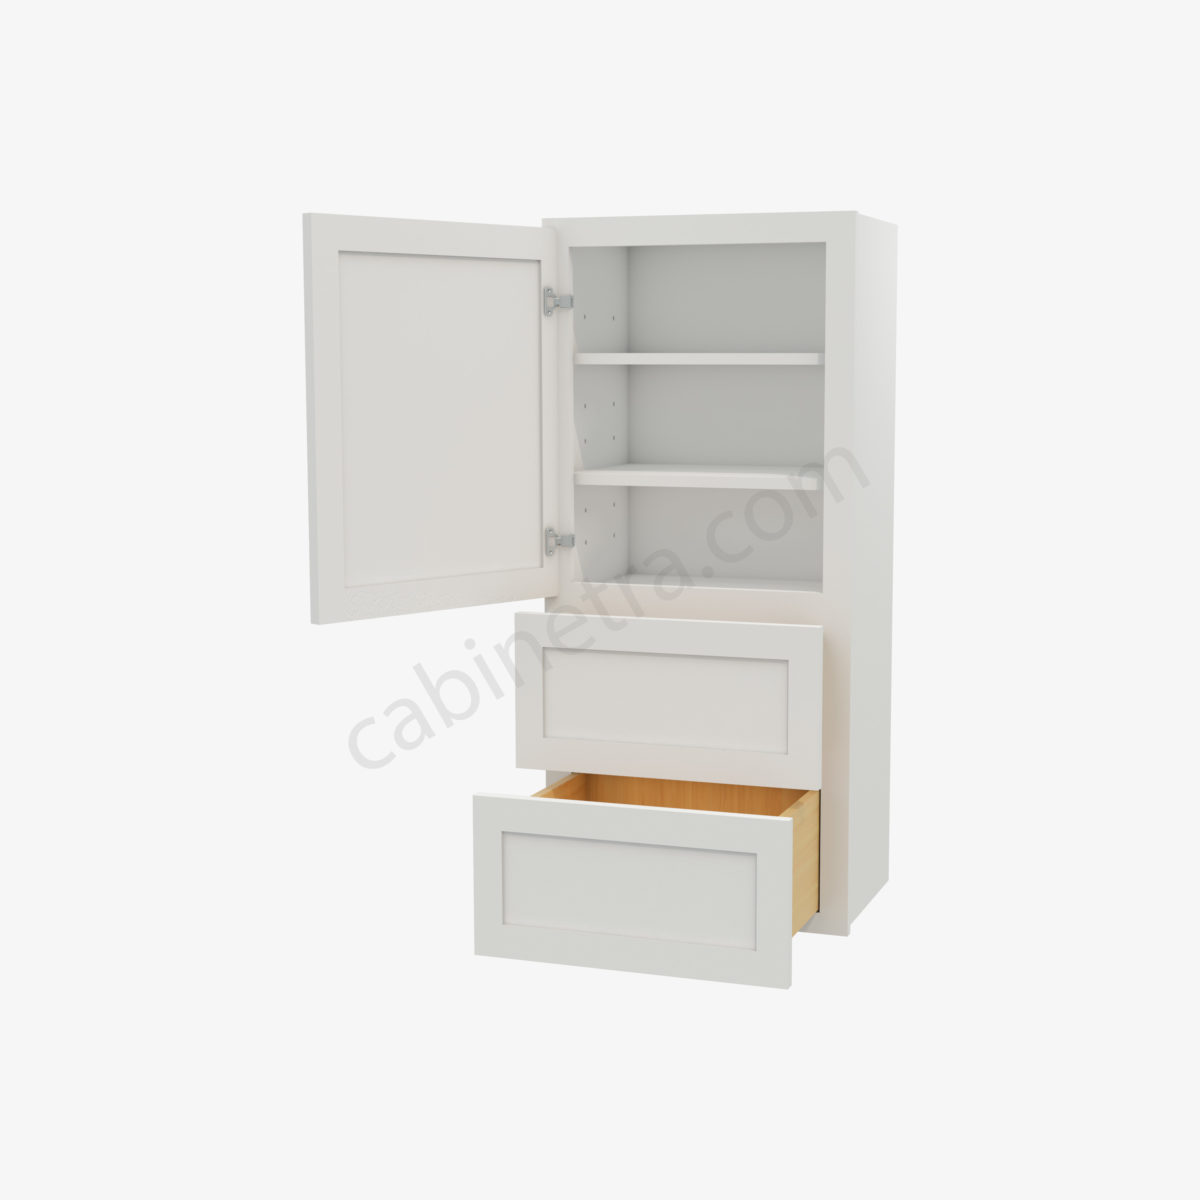 AW W2D1848 5 Forevermark Ice White Shaker Cabinetra scaled